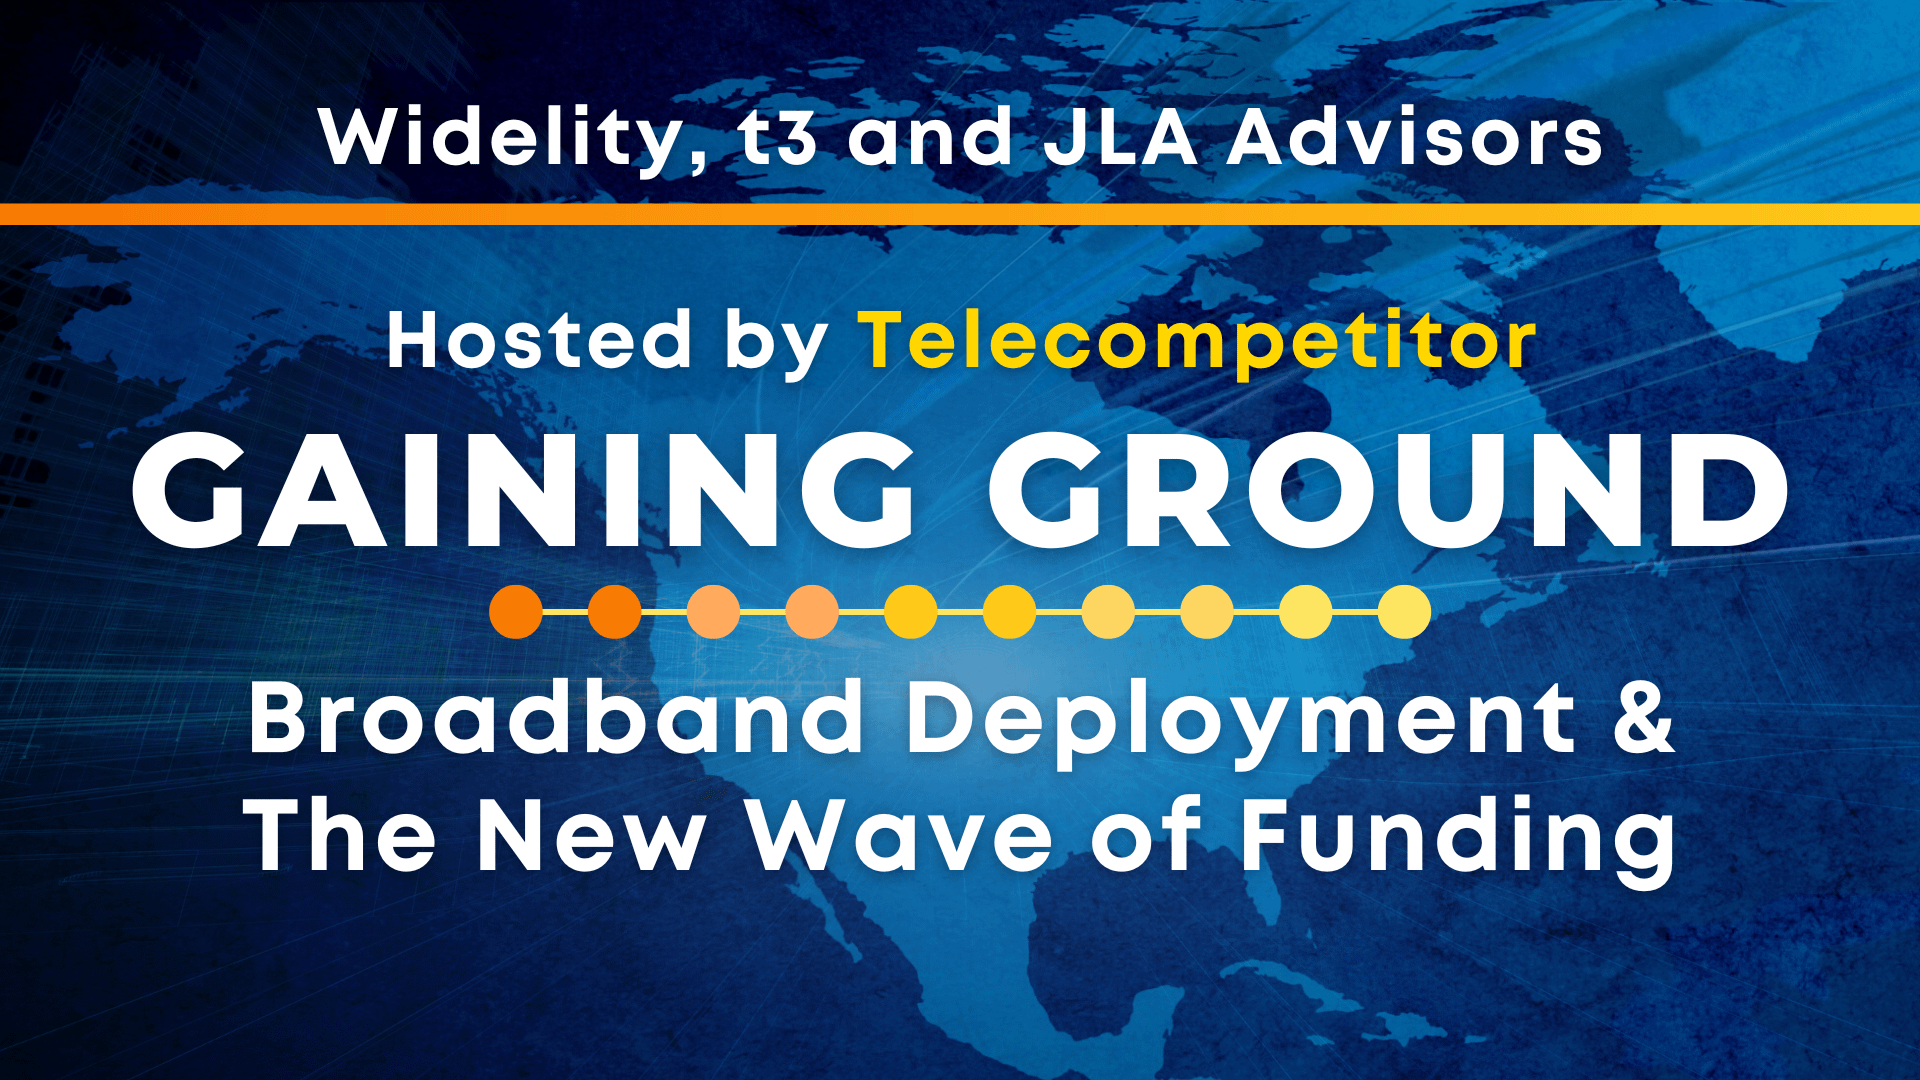 Webinar title for Gaining Ground: Broadband Deployment and the New Wave of Funding webinar with t3, JLA Advisors, and Widelity. Hosted by Telecompetitor.